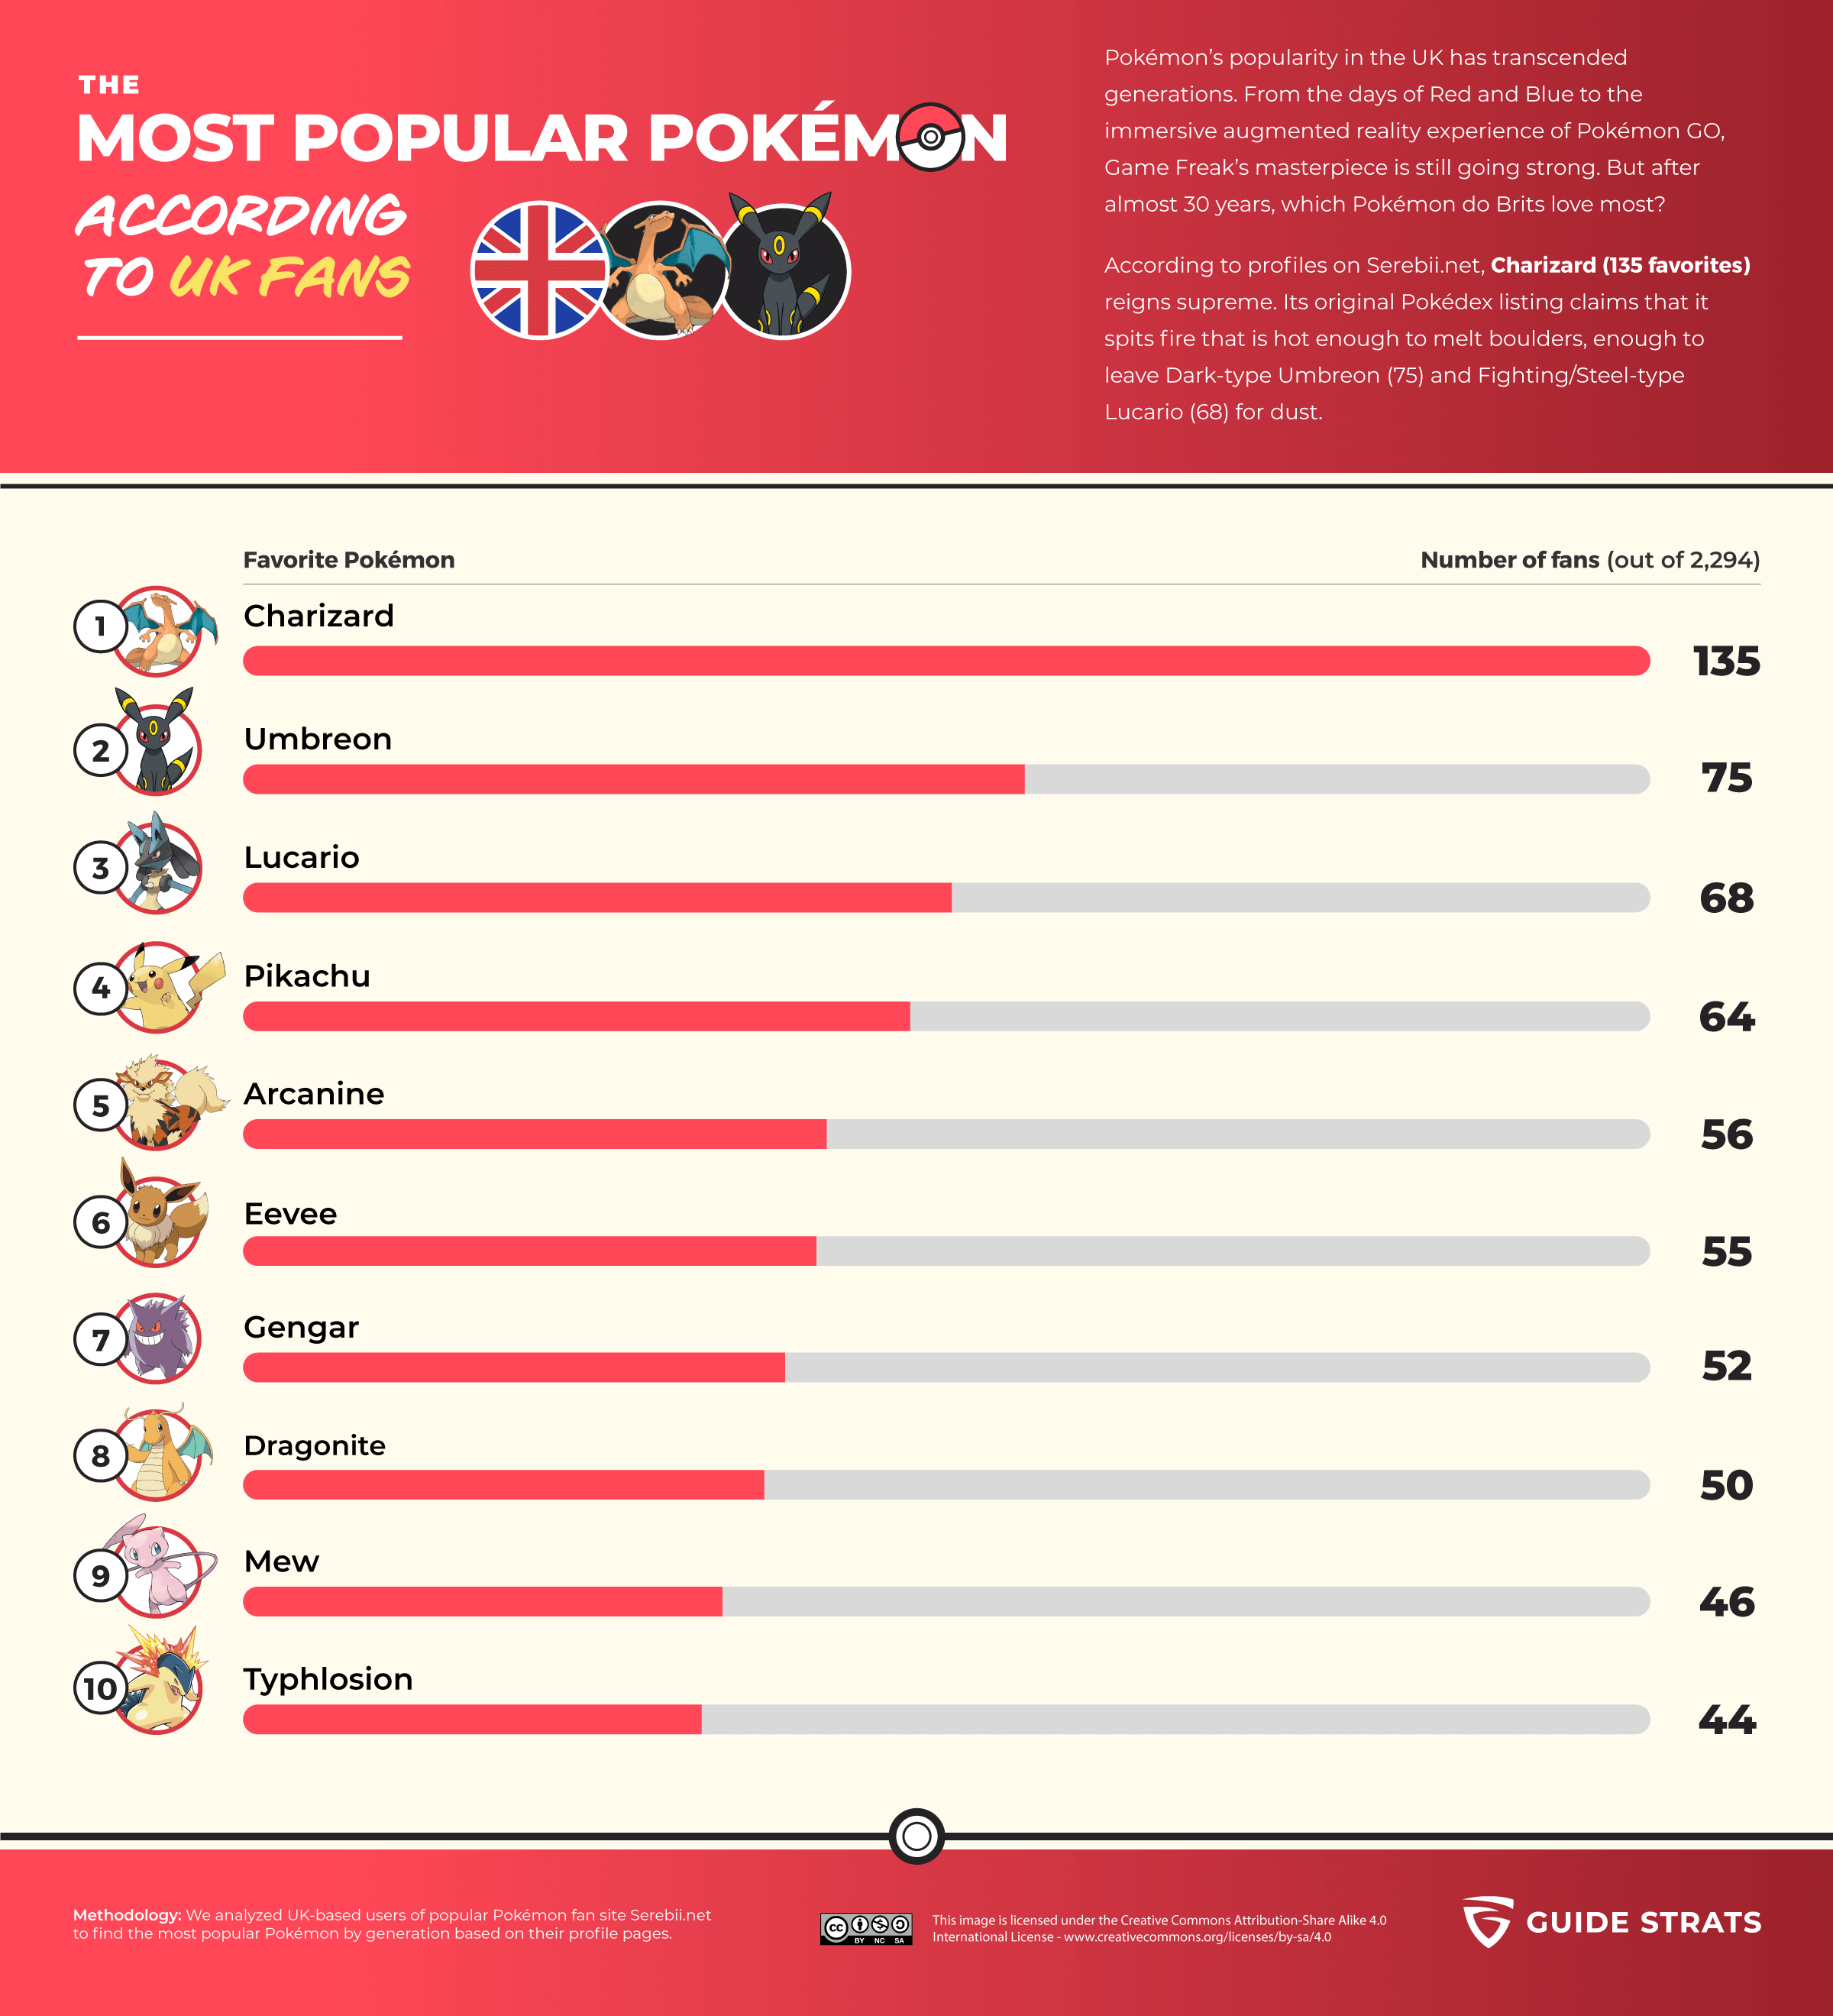 The most popular Pokemon, according to British fans